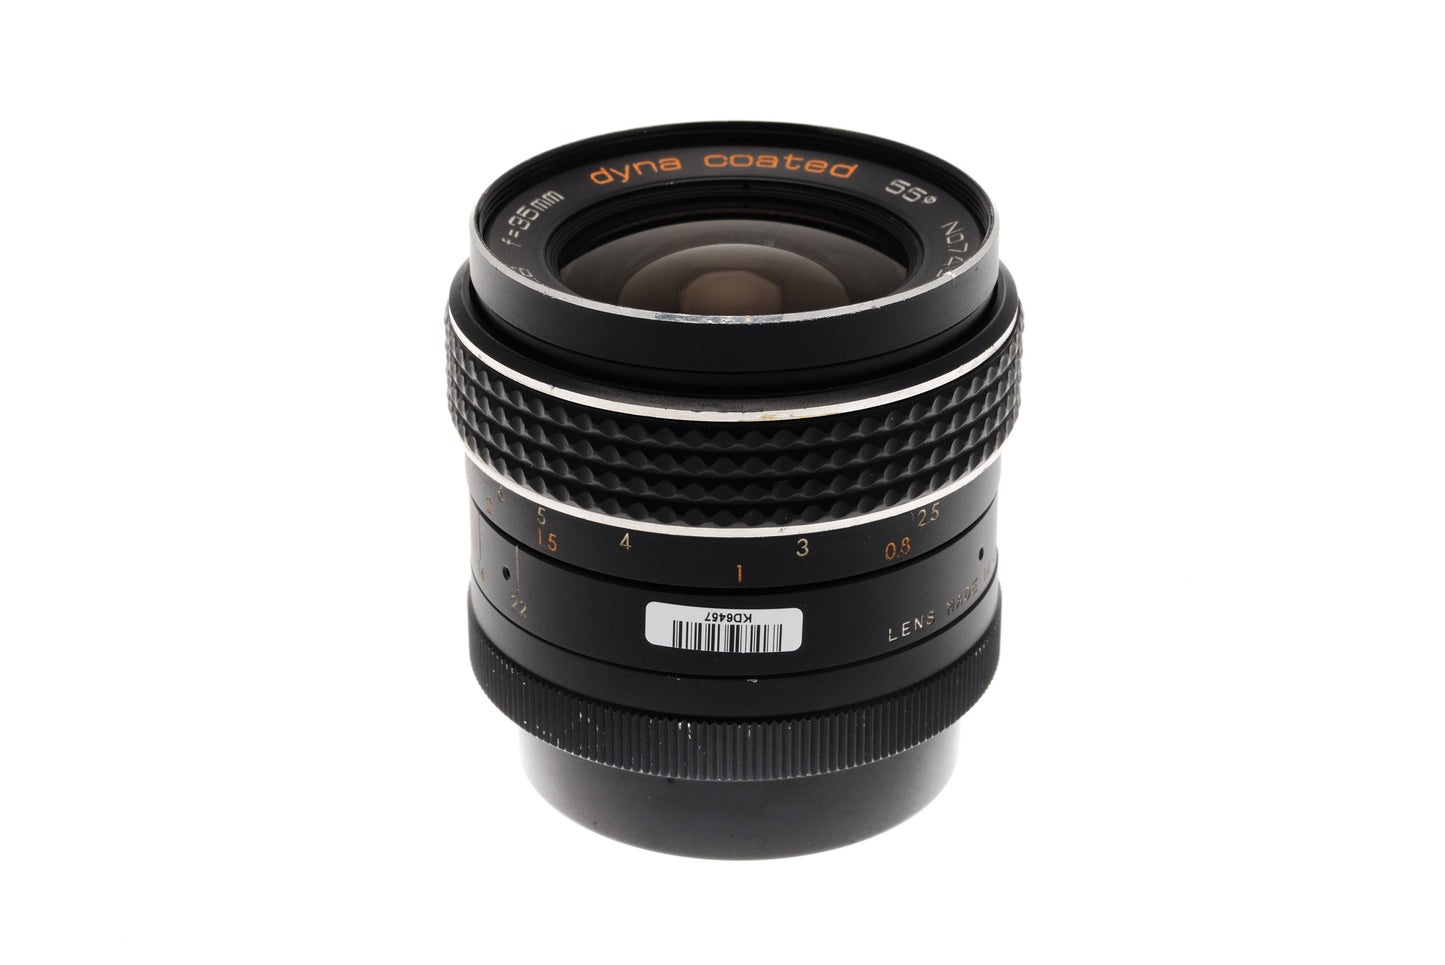 Other Avanar 35mm f2.8 dyna coated